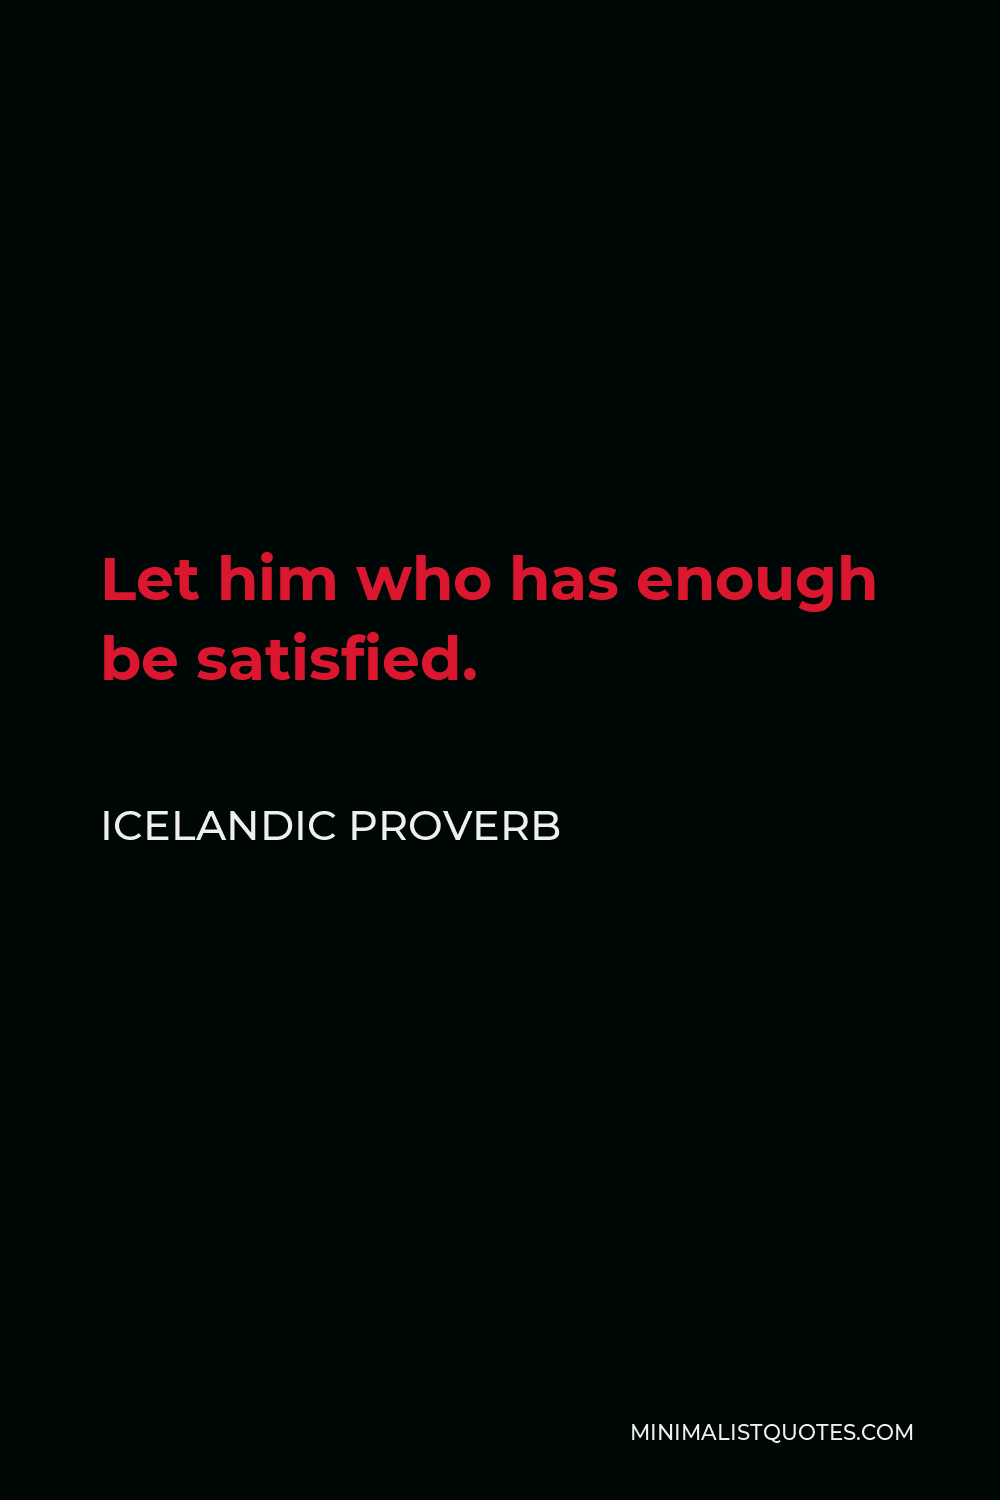 Icelandic Proverb Quote - Let him who has enough be satisfied.